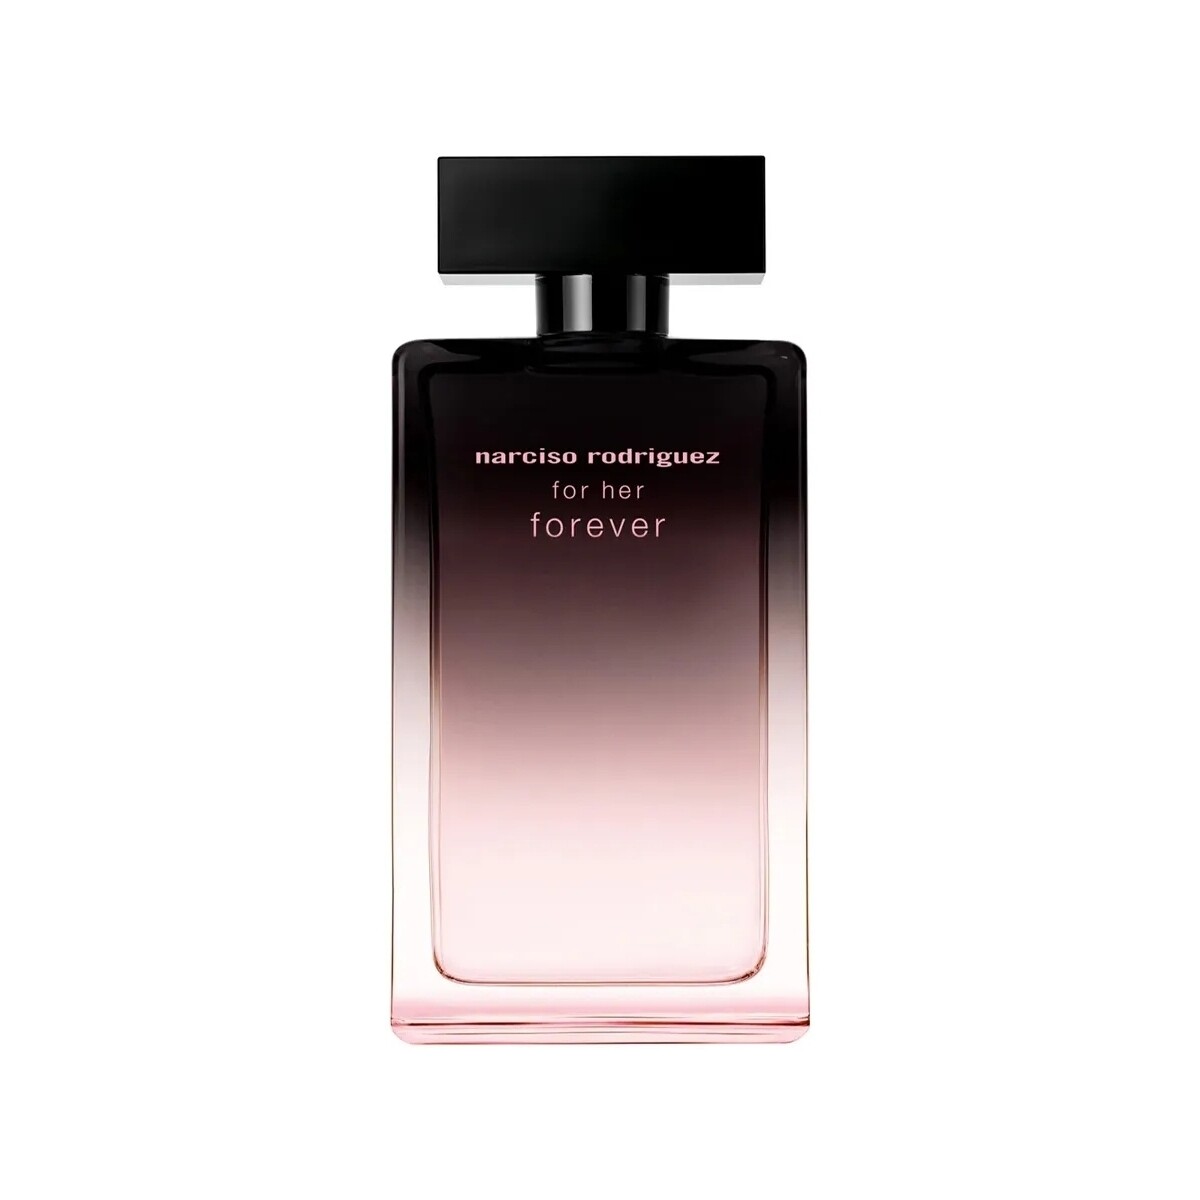 Belleza Mujer Perfume Narciso Rodriguez Forever For Her - Eau de Parfum - 100ml Forever For Her - perfume - 100ml